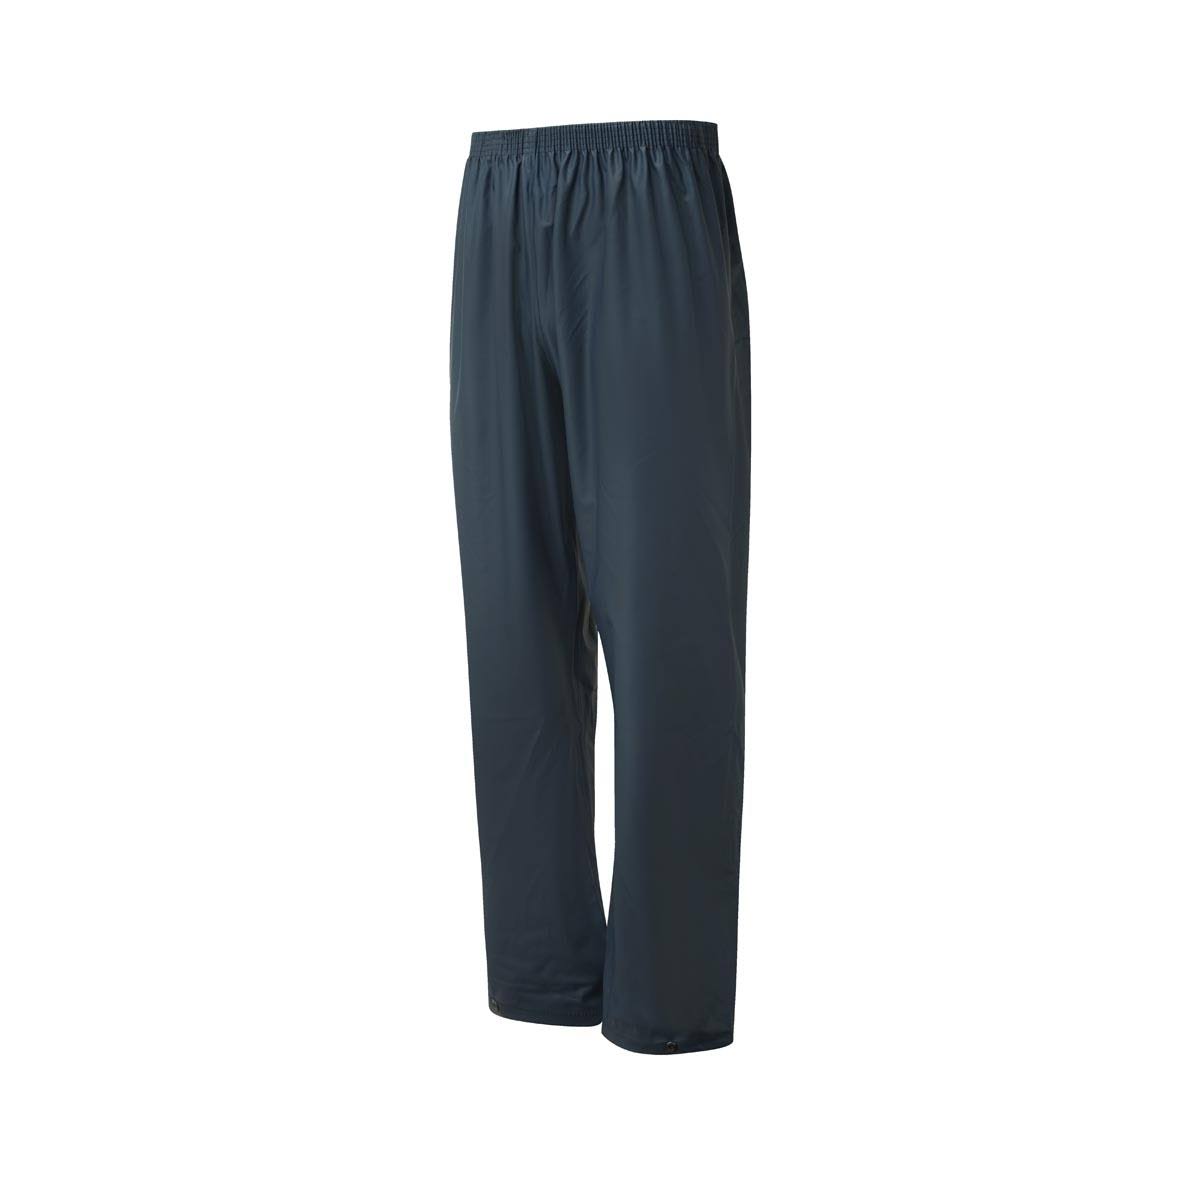 Fort 921-NVY-2XL 921 Airflex Trouser Navy Blue - 2XL | By Toolden